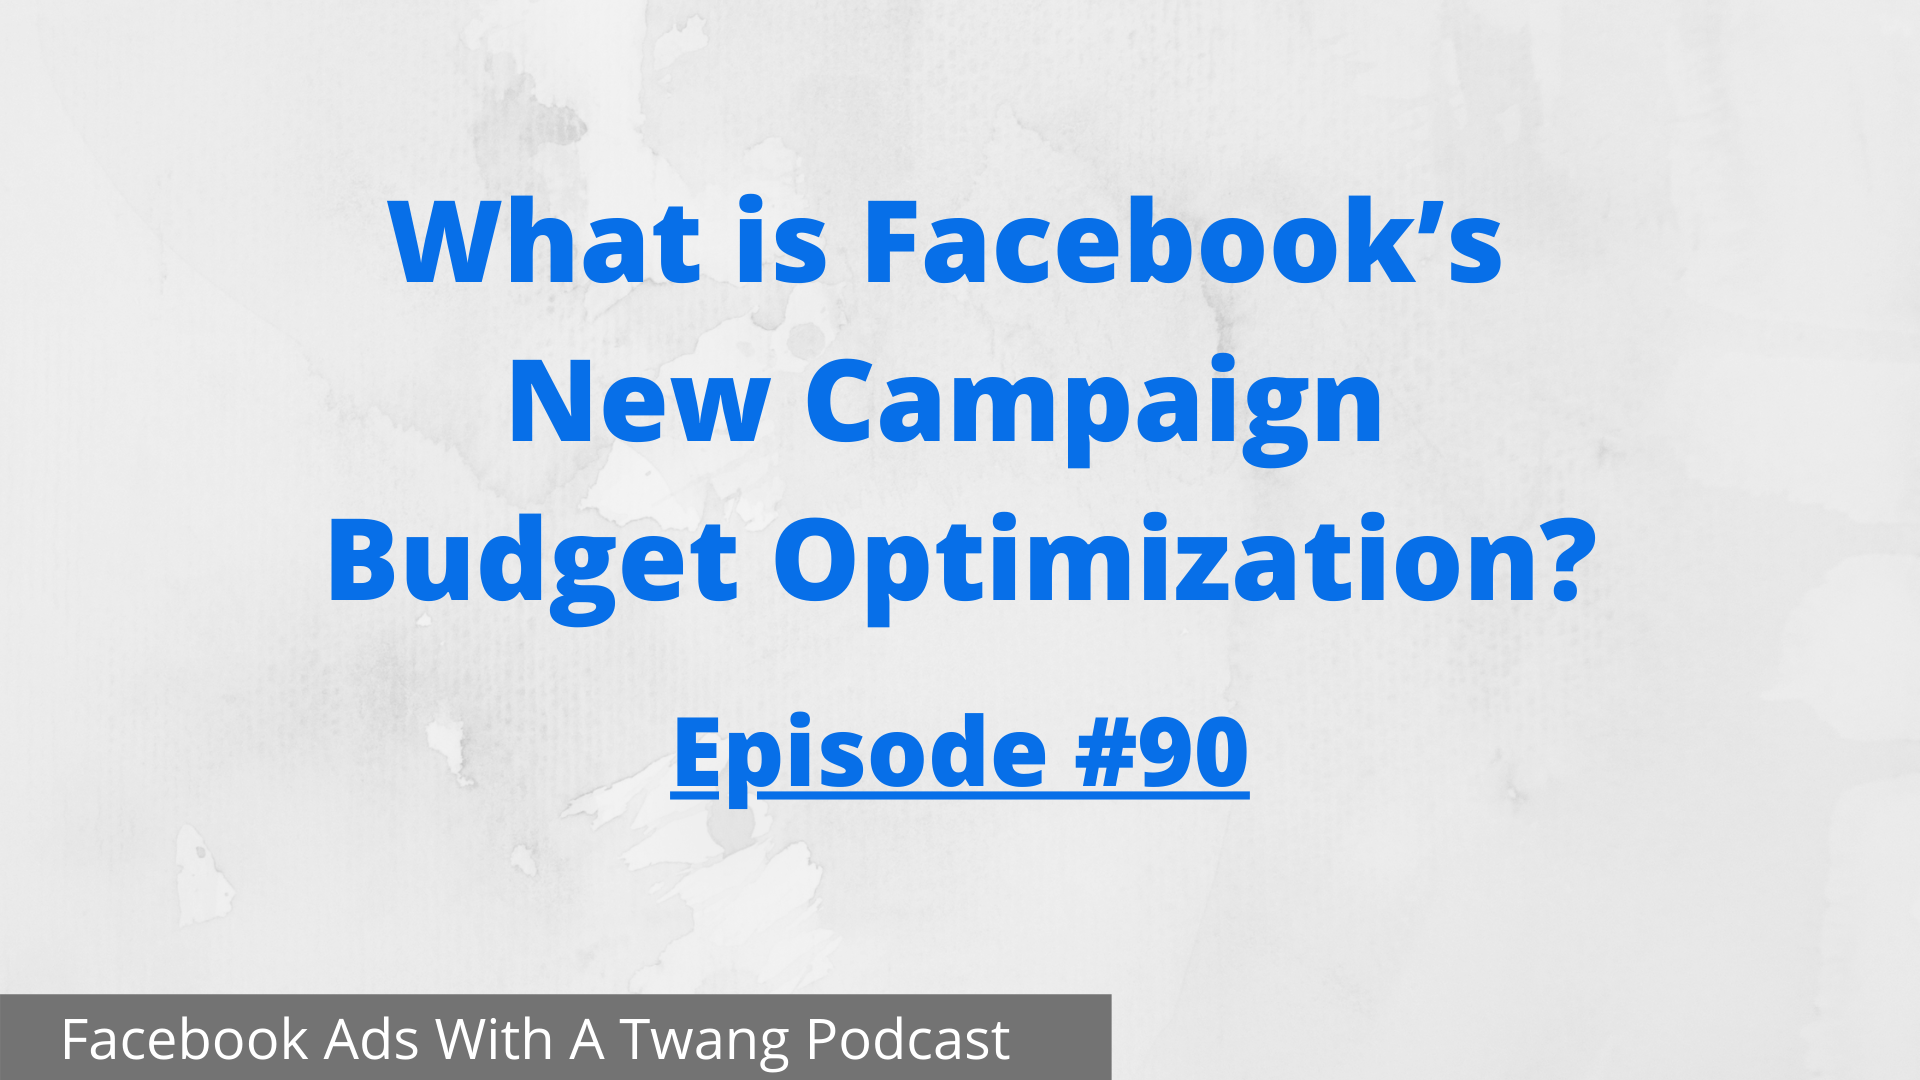 What is Facebook’s New Campaign Budget Optimization?